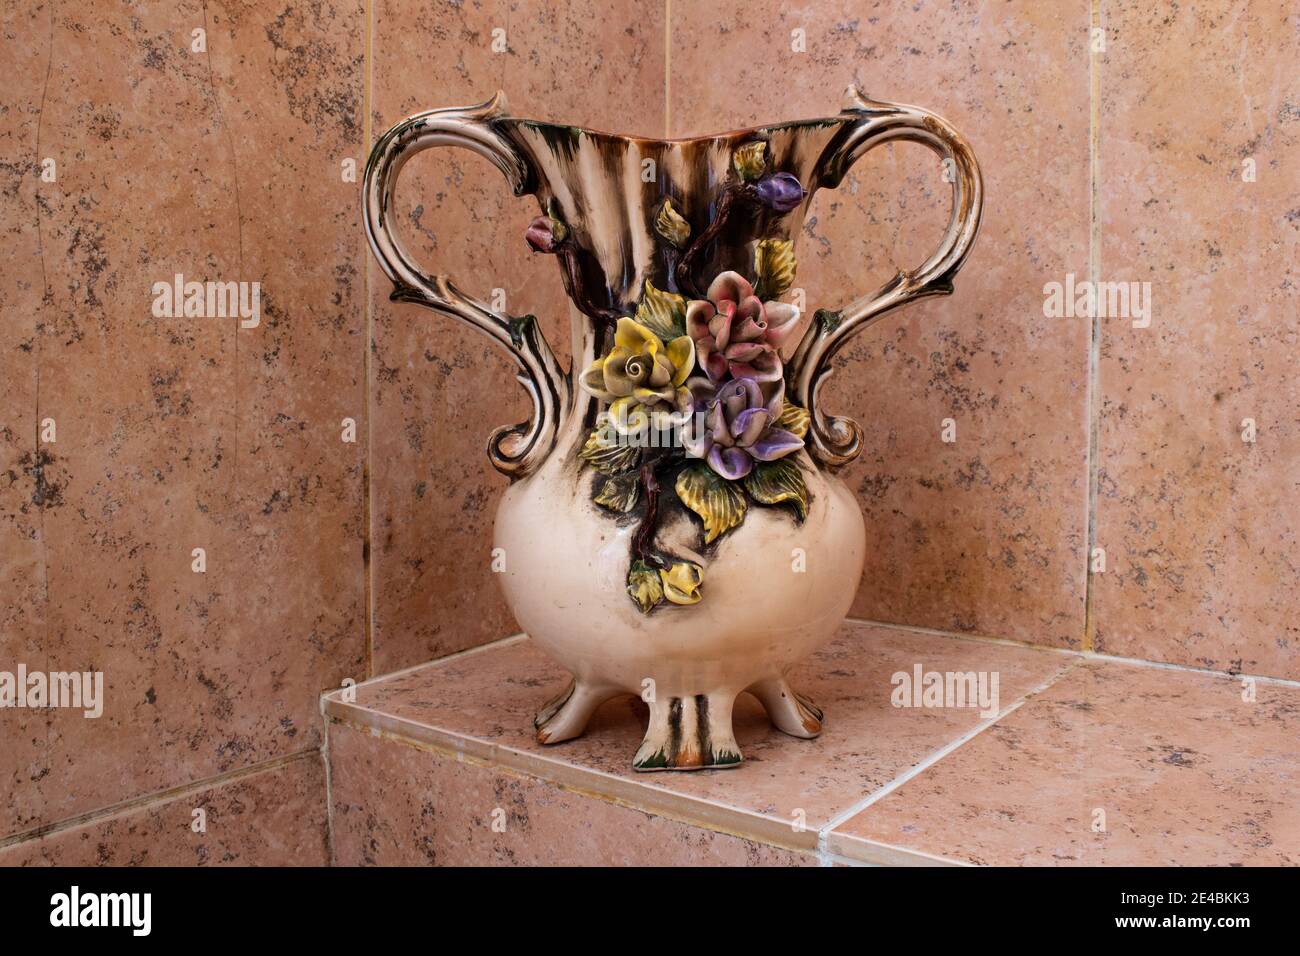 Old vintage pottery jar with embossed colorful flowers standing on a tile step. Salmon colors Stock Photo